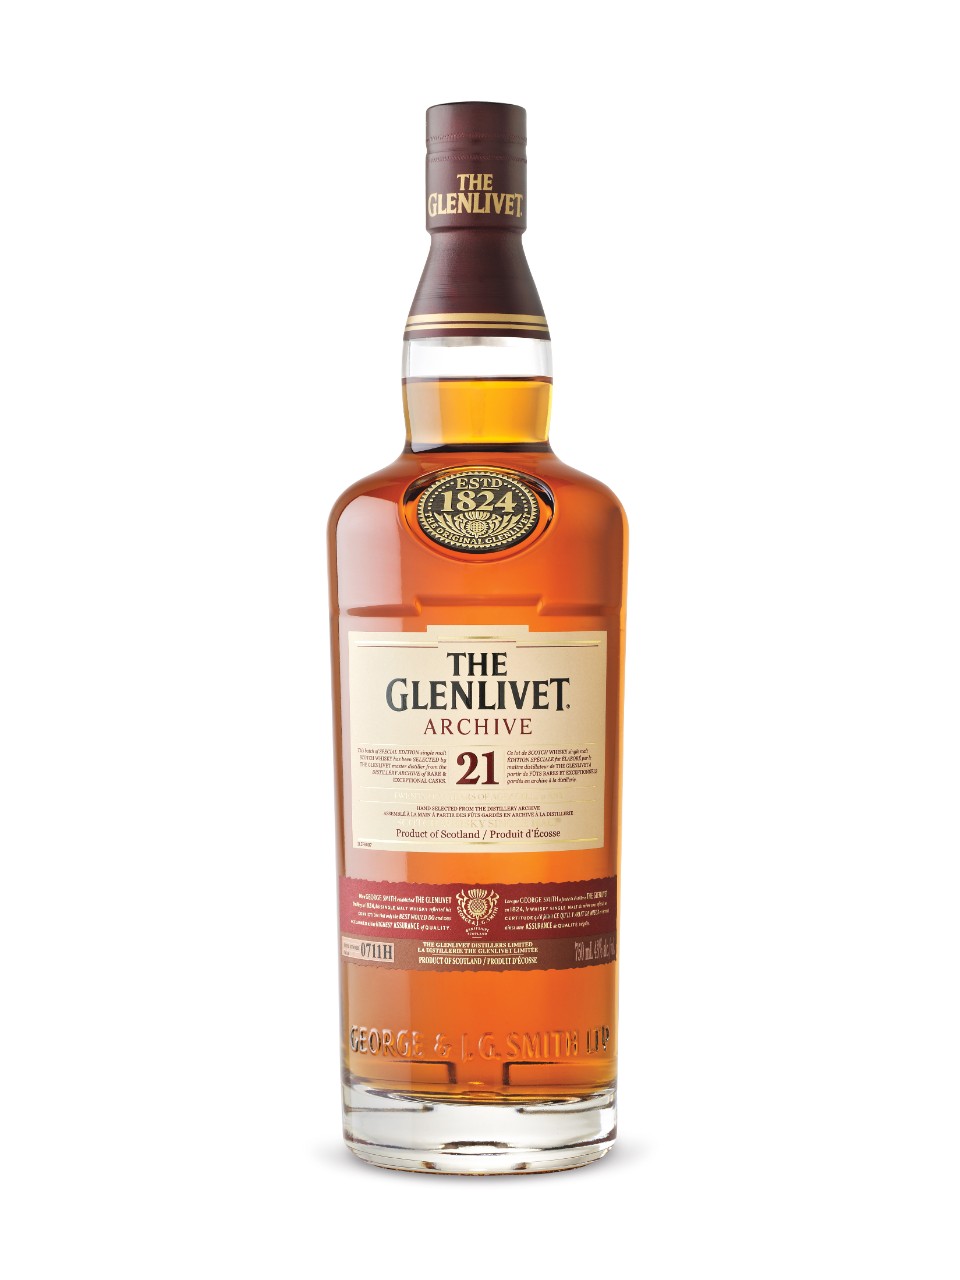 The Glenlivet Archive 21 Years Old Scotch Whisky